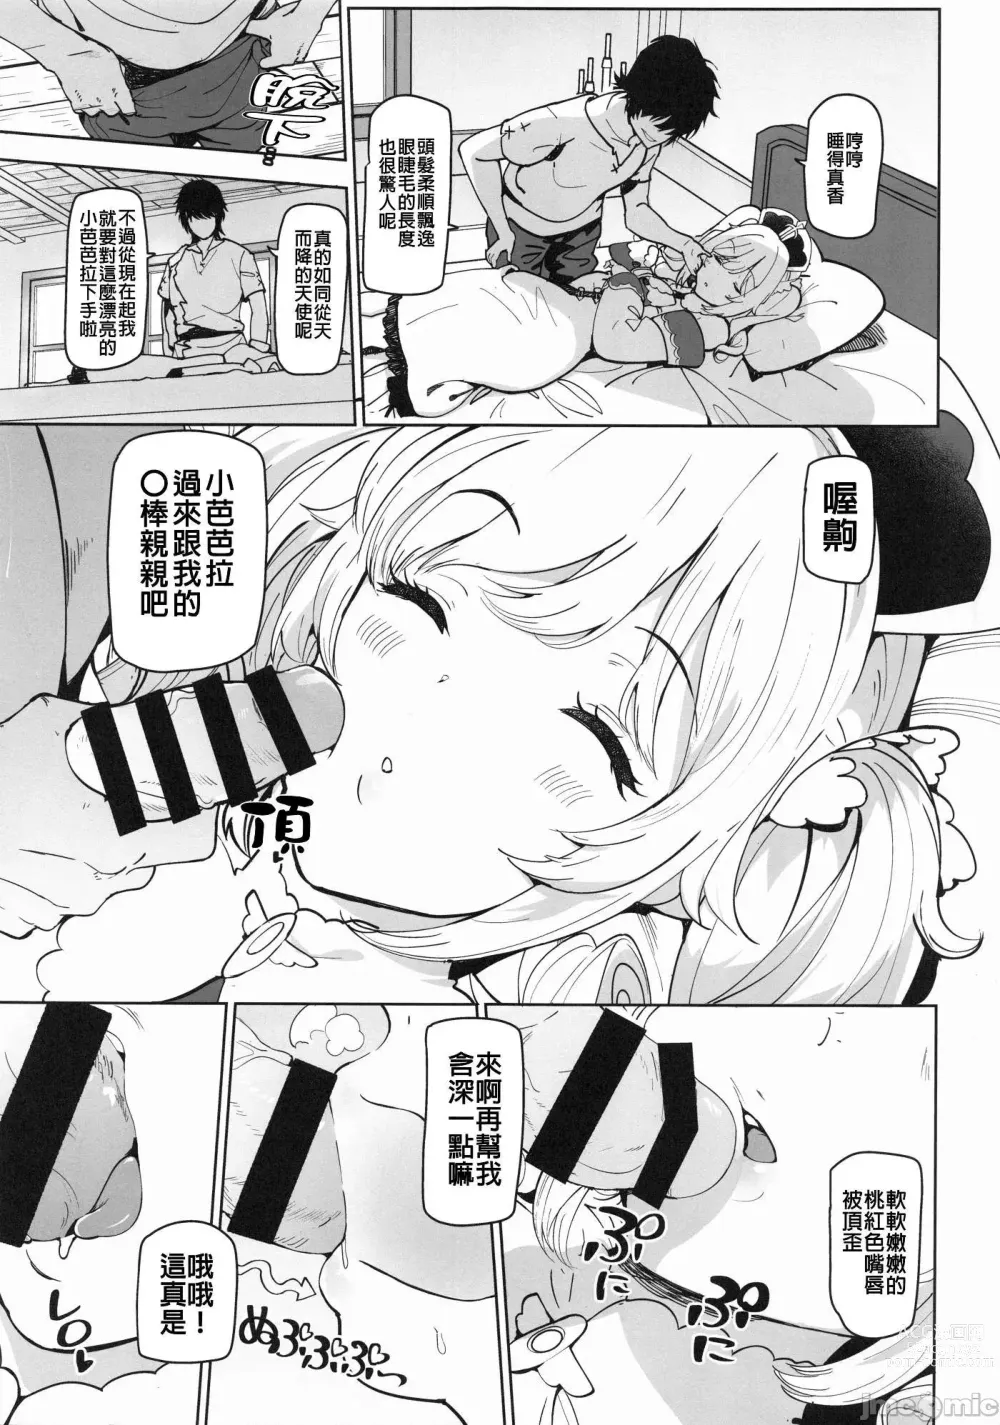 Page 6 of doujinshi 芭芭拉 入眠